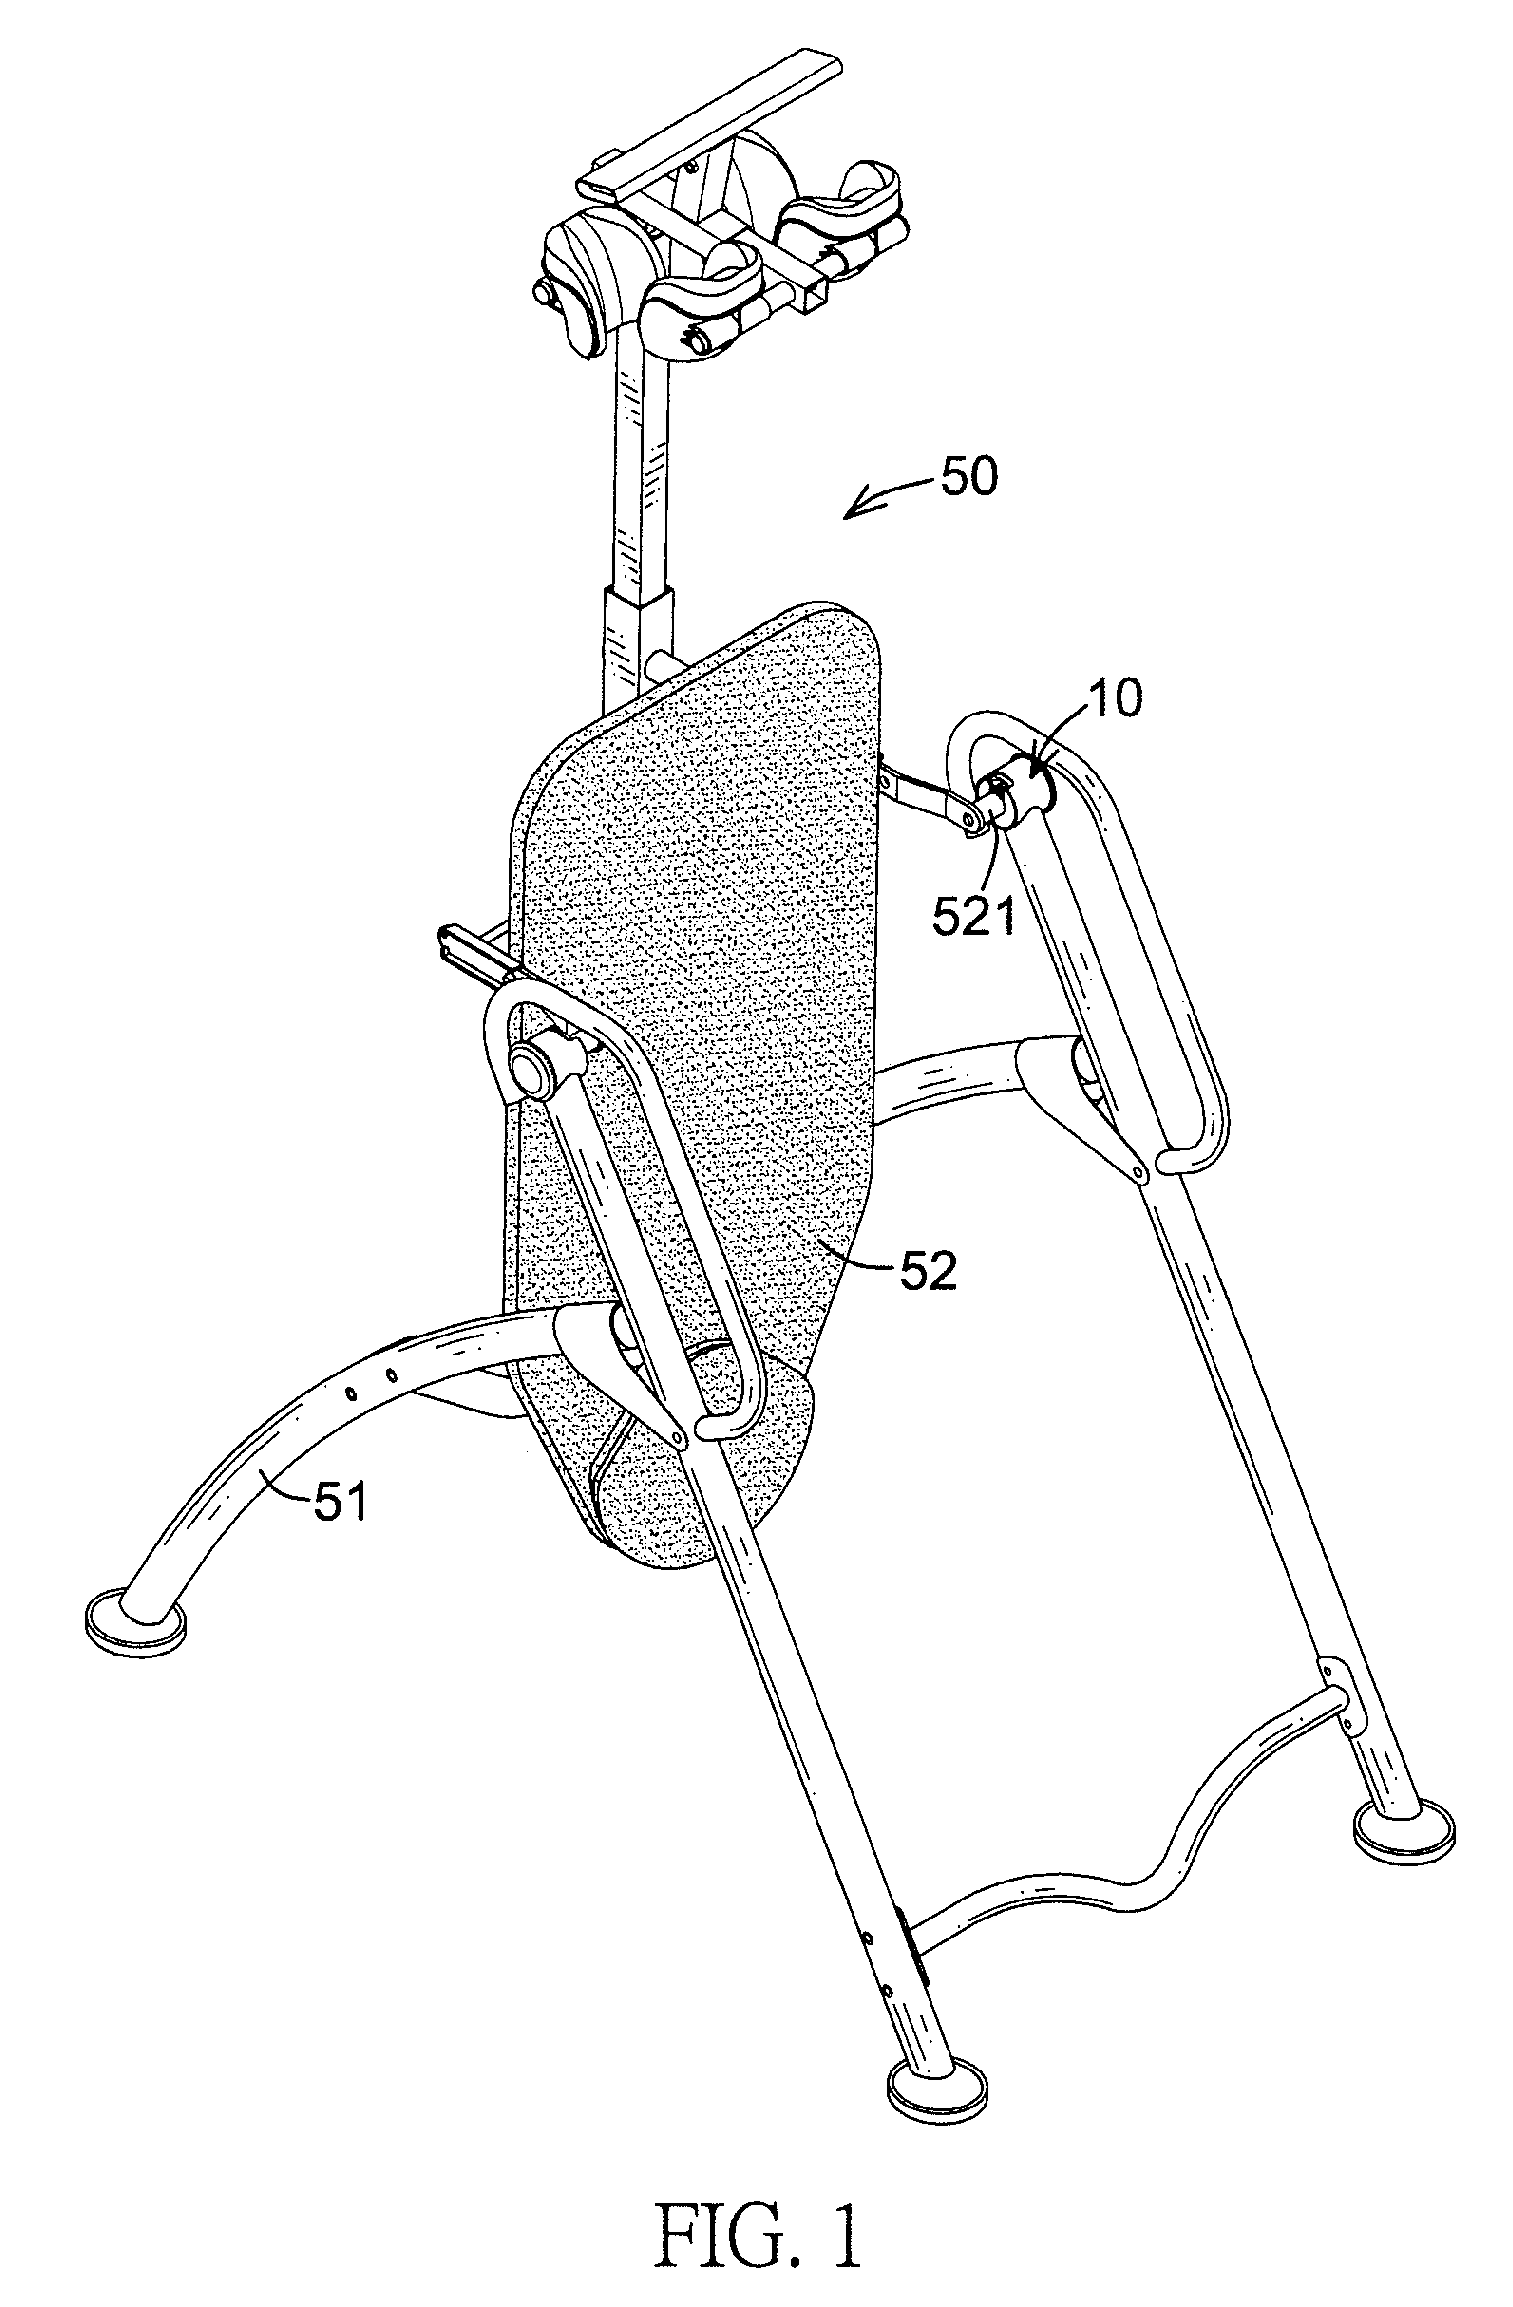 Safety assembly for an inversion table